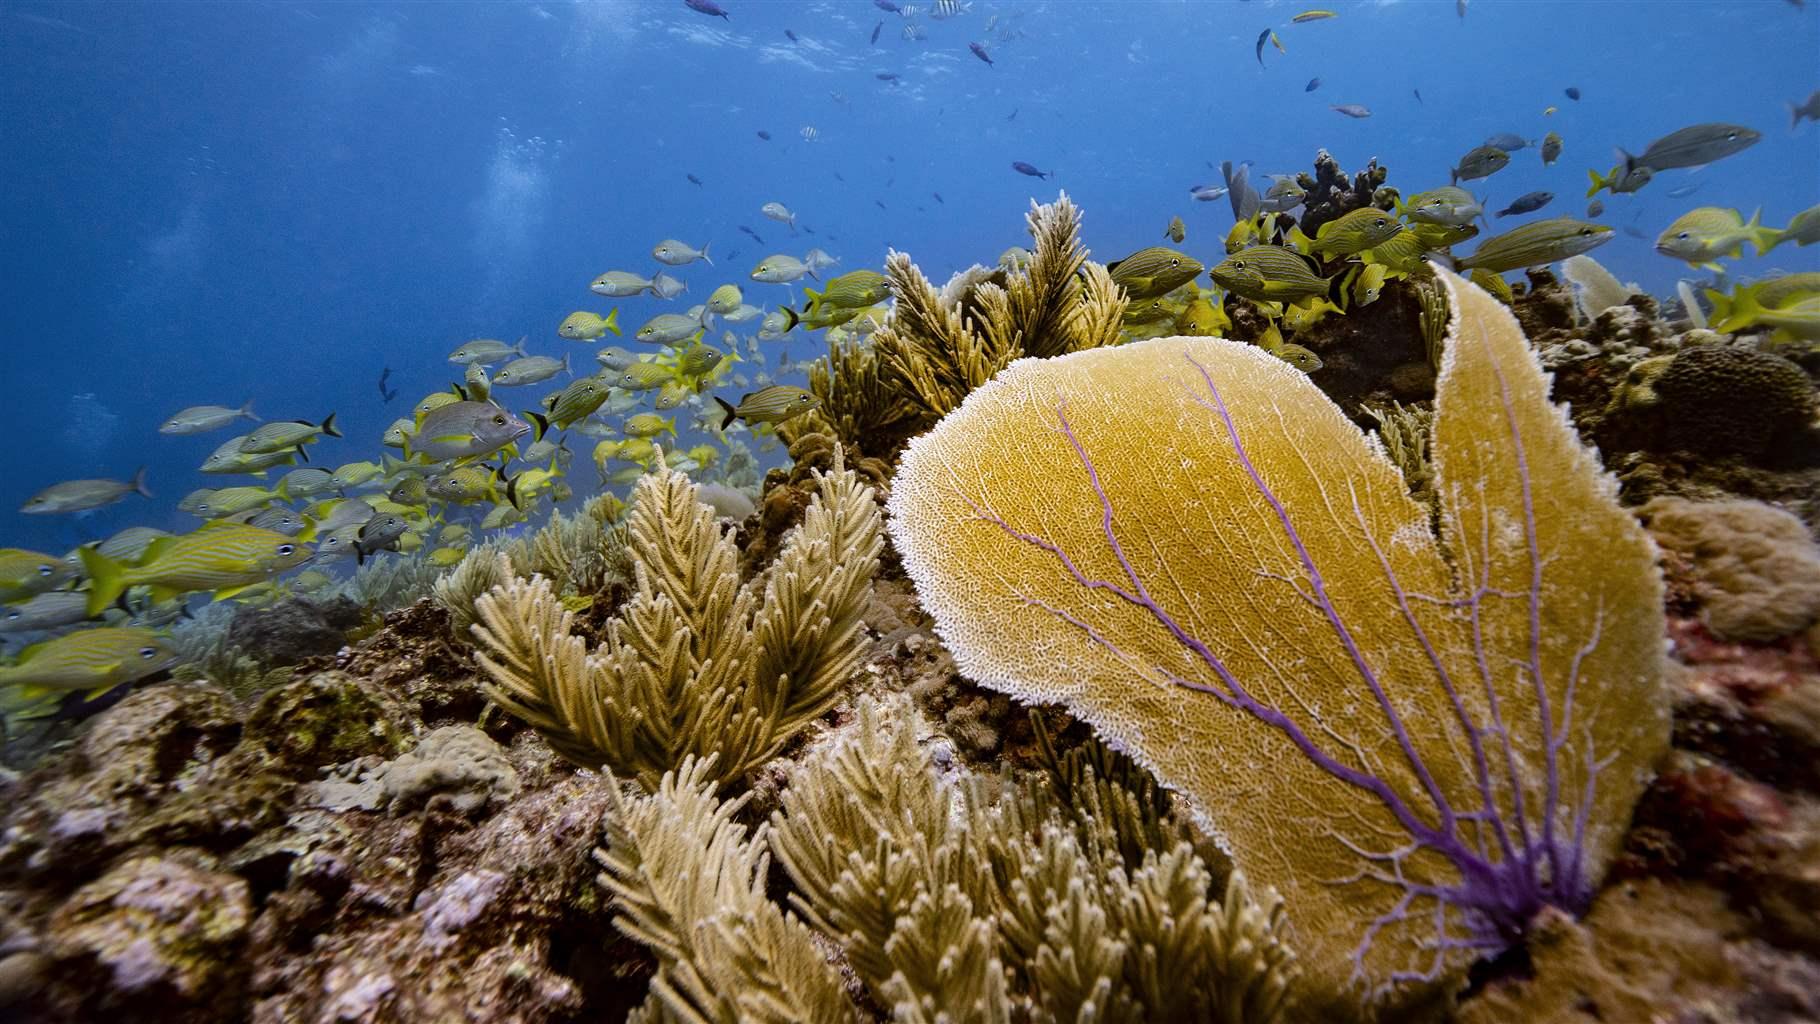 Fish and coral are thriving on this reef off the coast of Isla Mujeres, Mexico